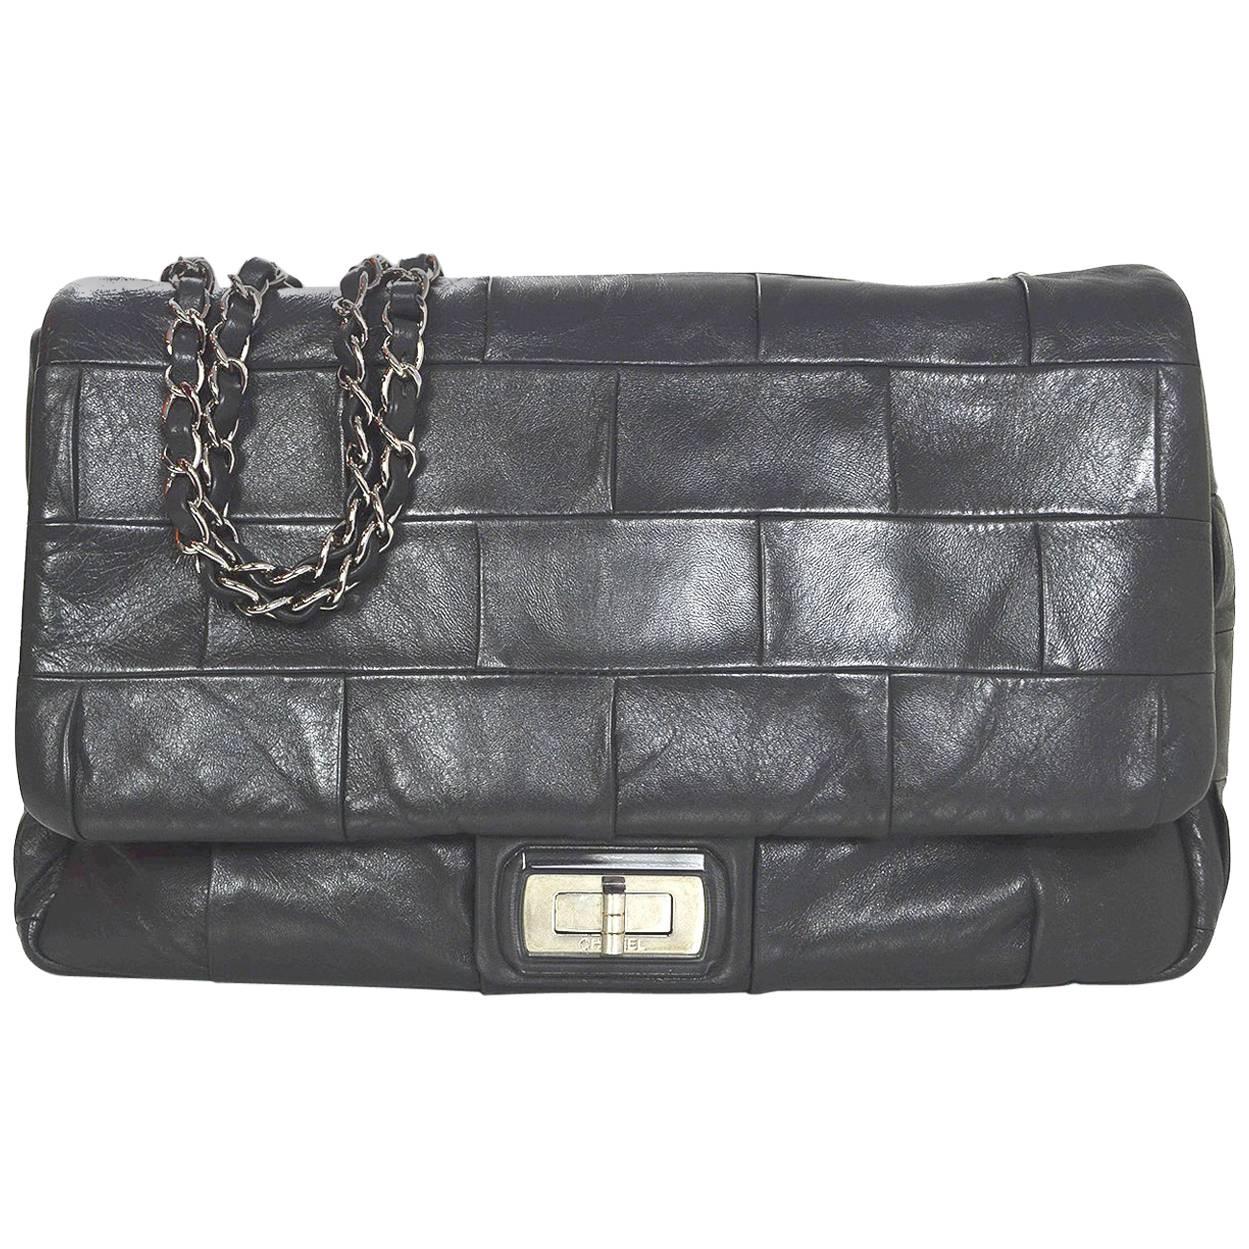 Chanel Grey Leather Square Quilted Reissue 2.55 Flap Bag